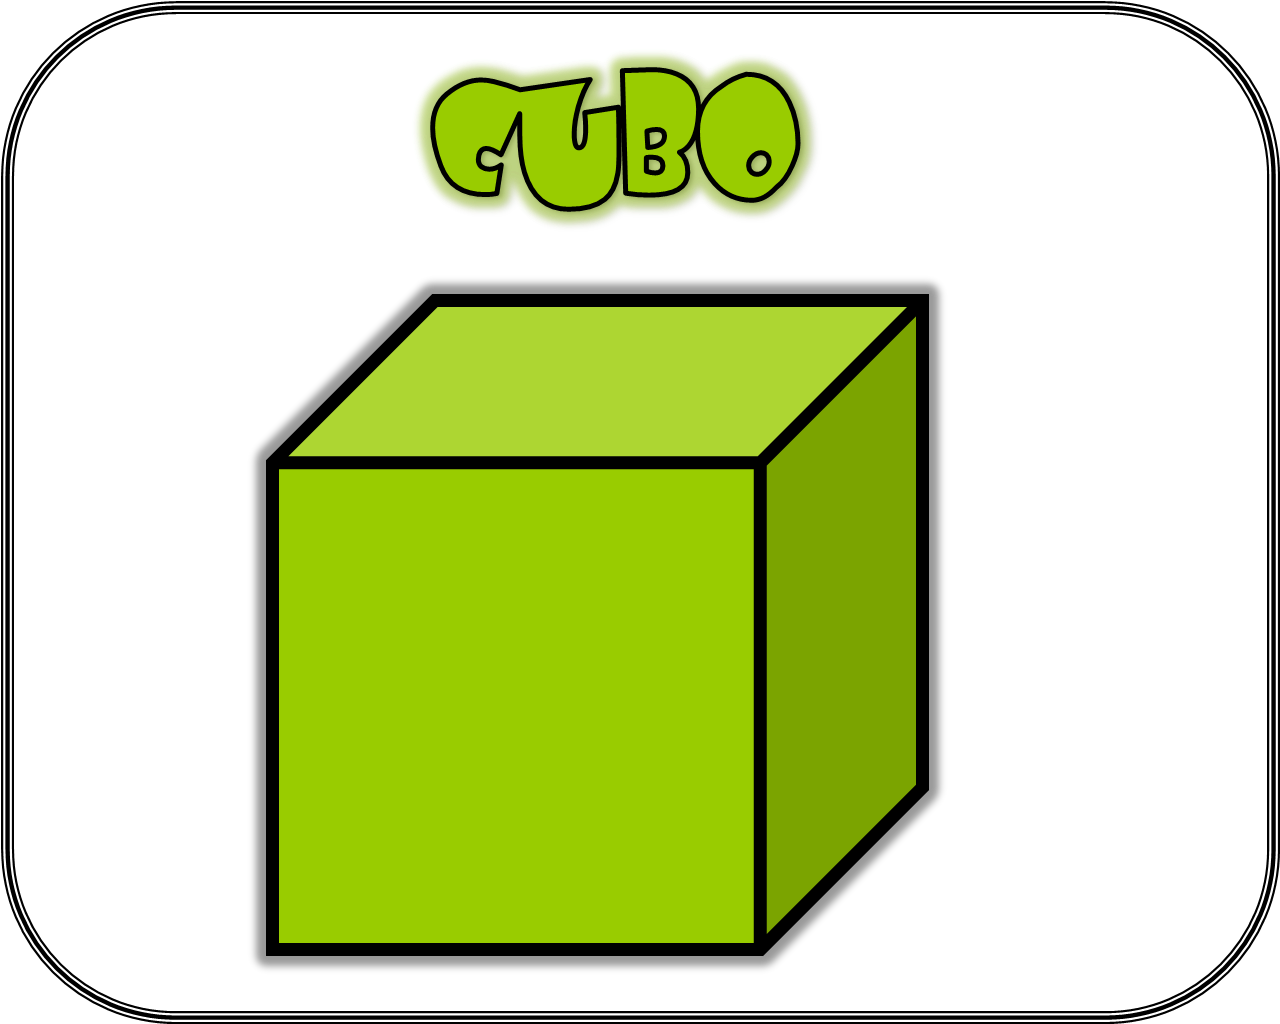 A Green Cube On A Black Background